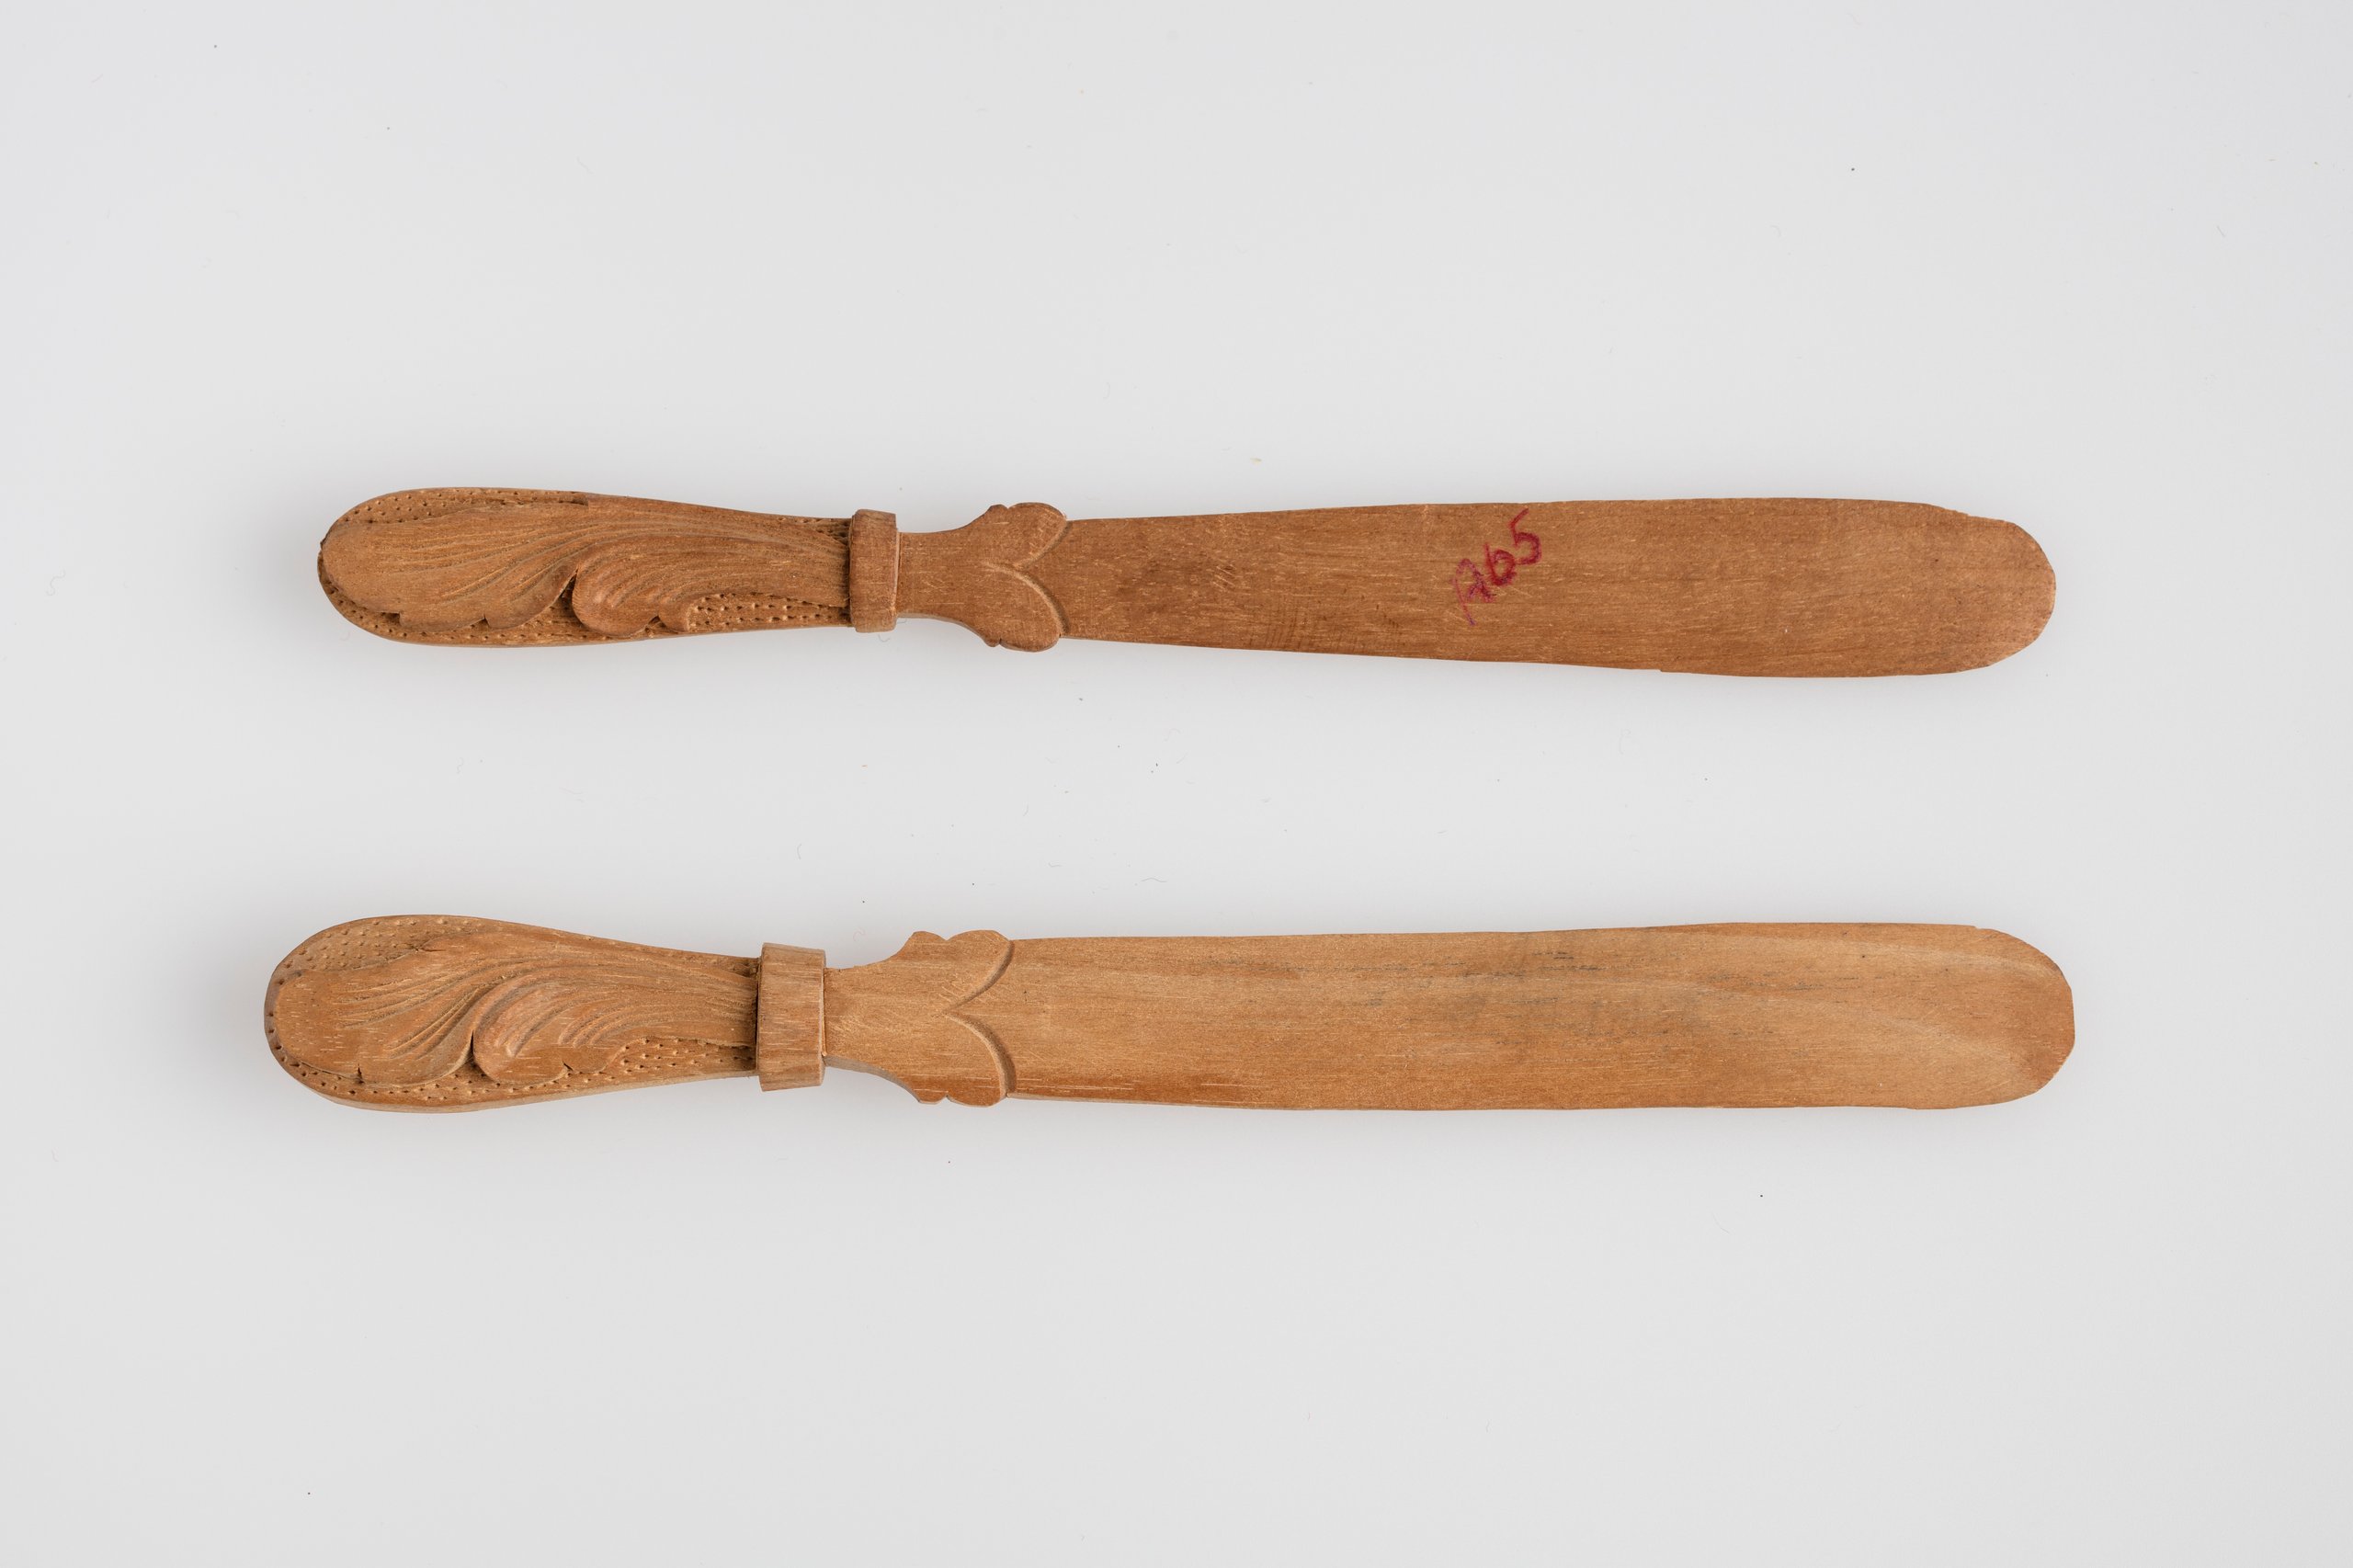 Carved paper knives from Norway